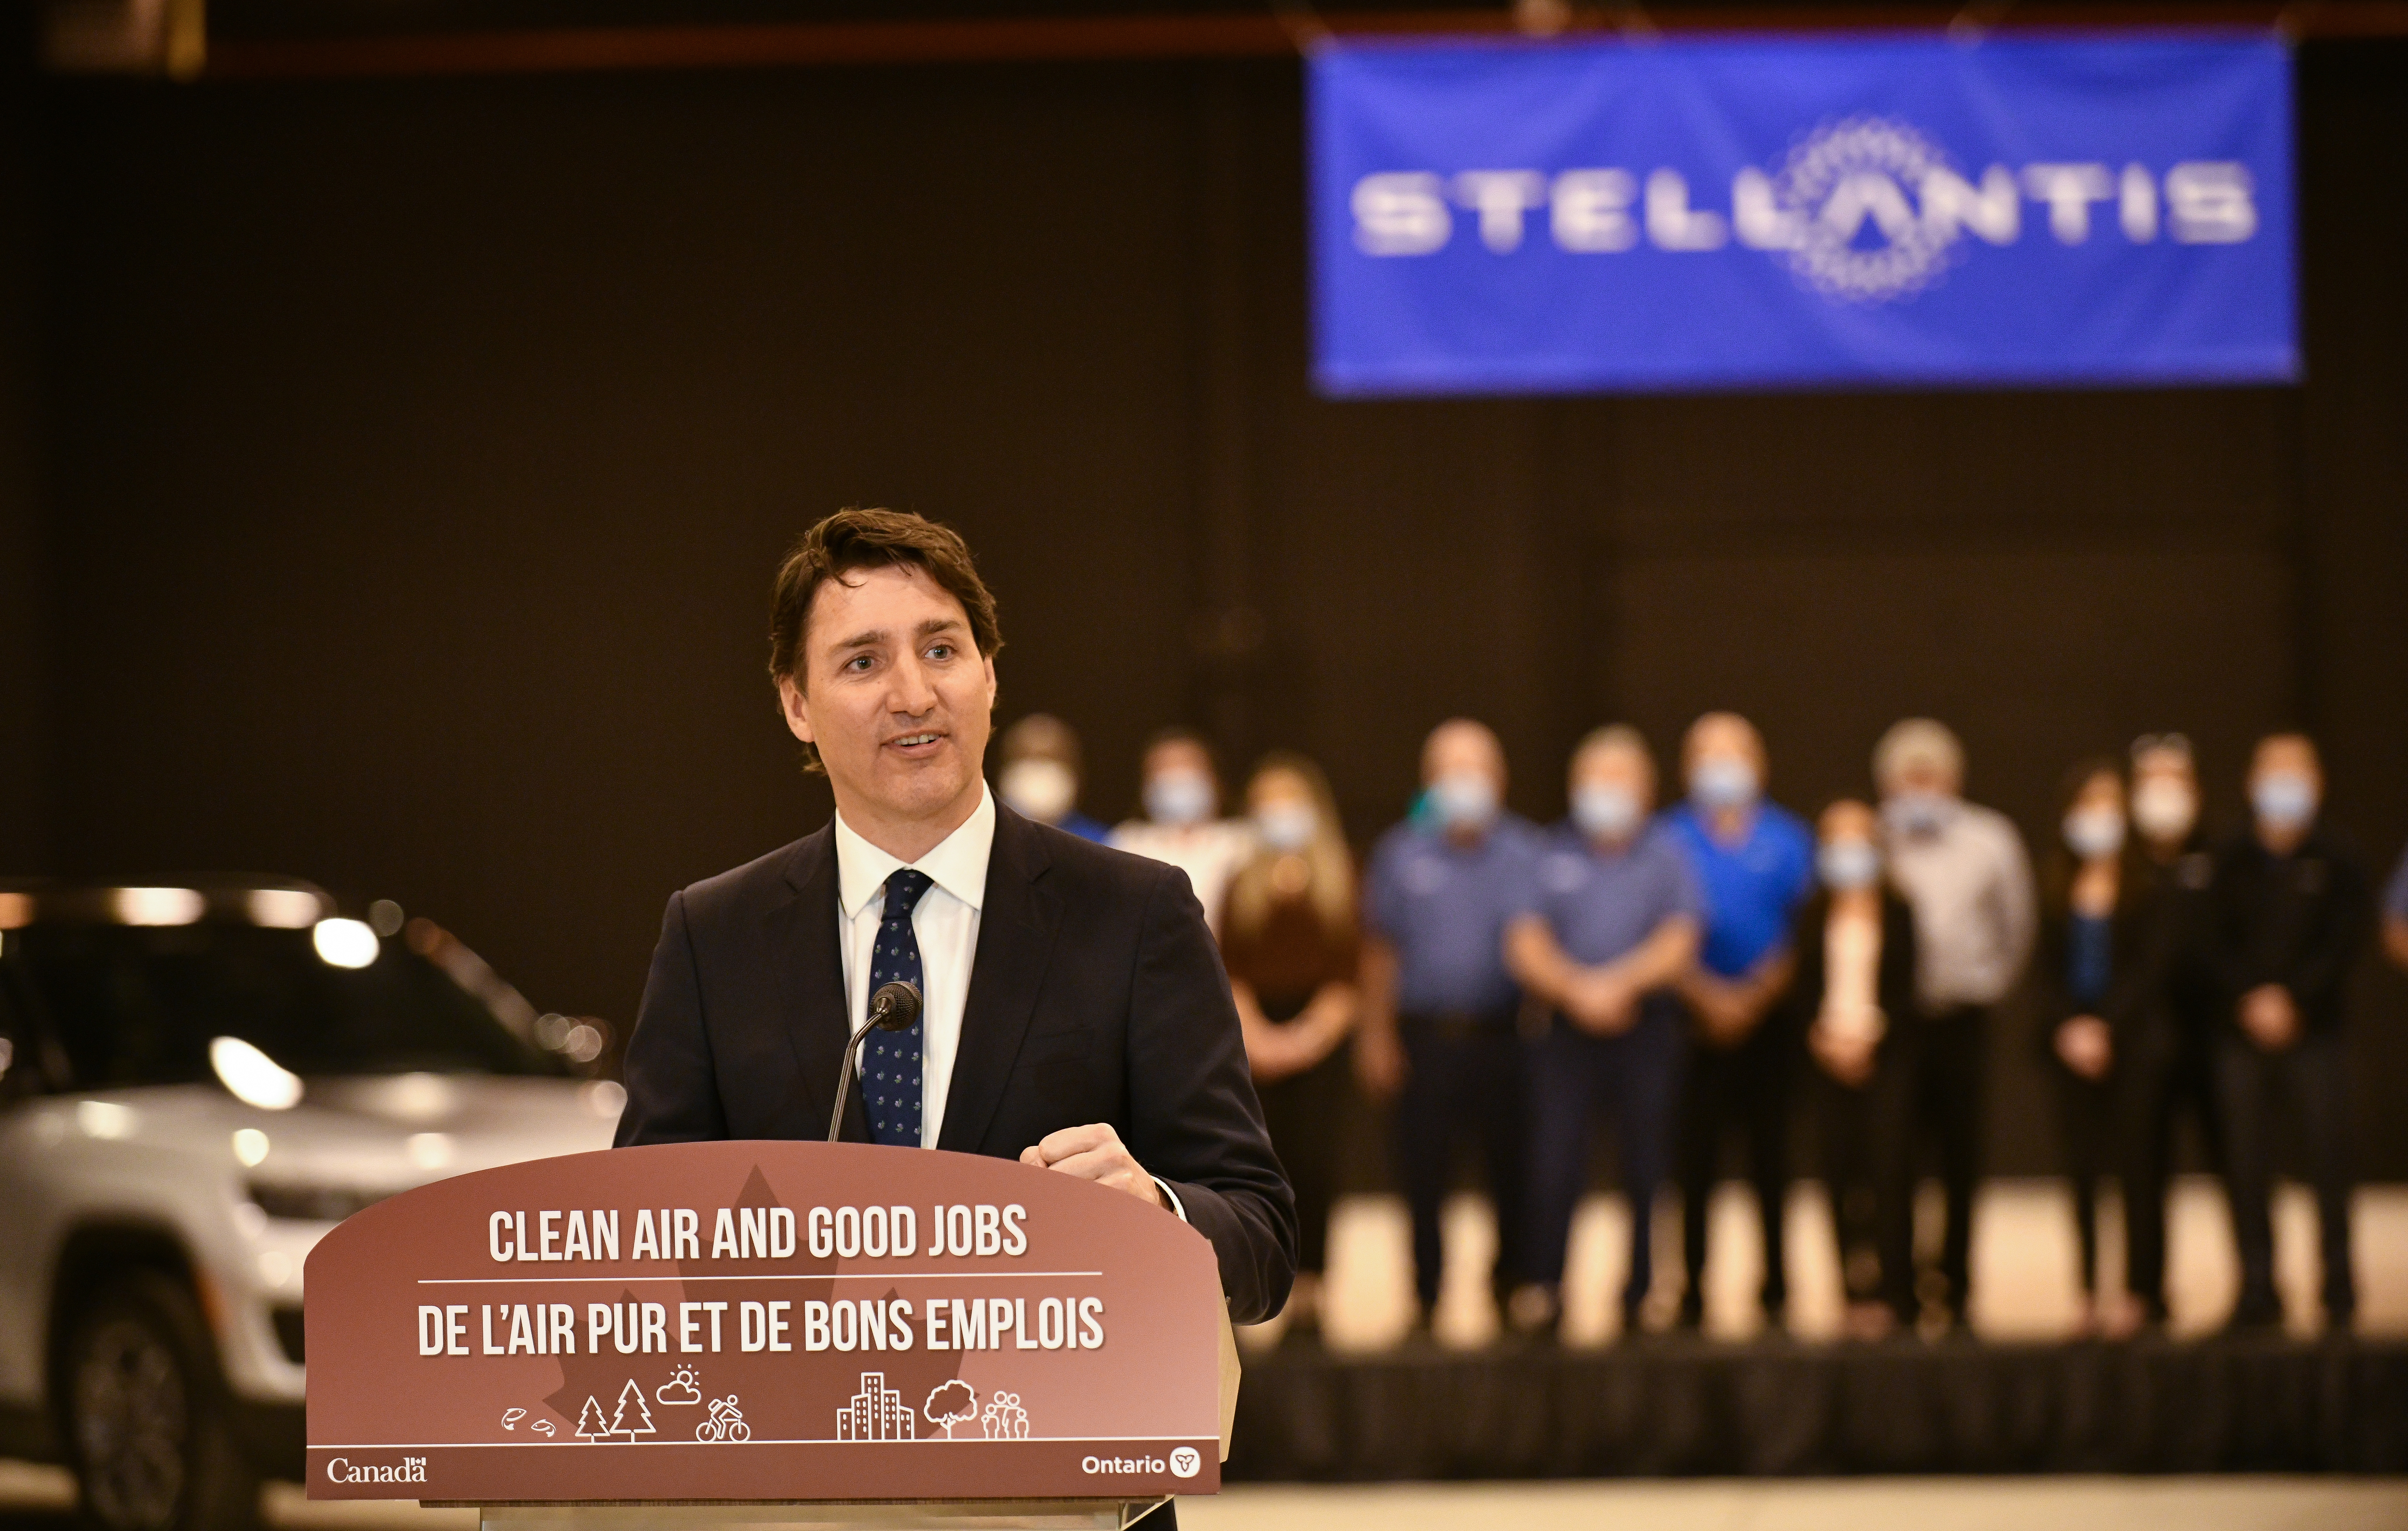 On May 2, 2022, in Windsor, Ontario, Stellantis North America Chief Operating Officer Mark Stewart, alongside Canadian Prime Minister Justin Trudeau and other senior government officials, announced an investment of $3.6 billion CAD to accelerate the company’s electrification plans, securing the future of the Windsor and Brampton (Ontario) plants and expanding Windsor’s Automotive Research and Development Centre (ARDC). / Stellantis